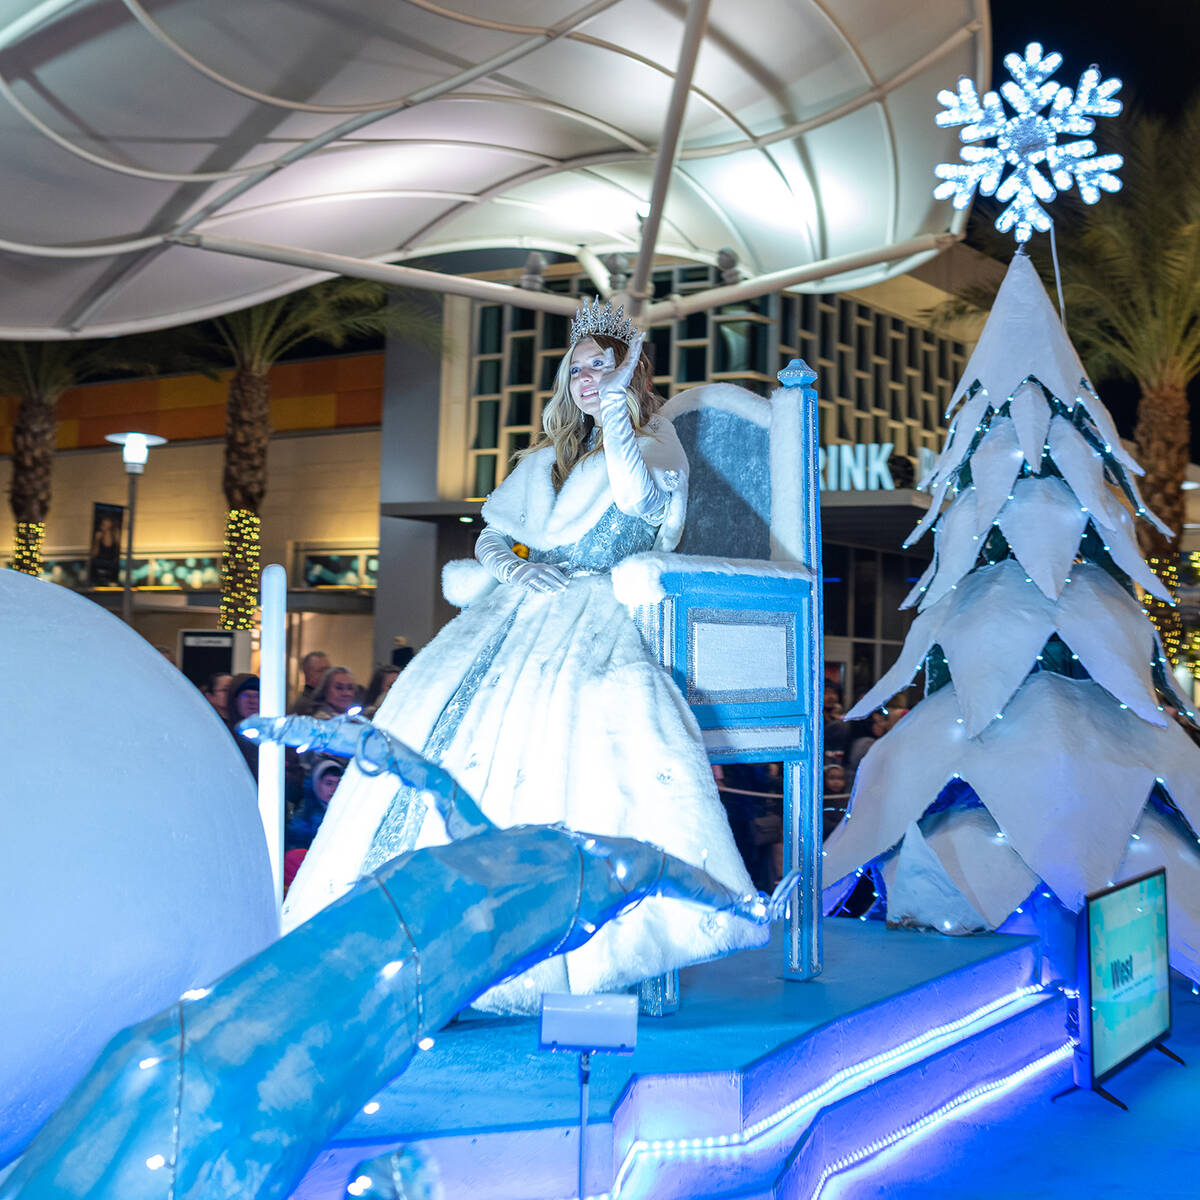 This year's Downtown Summerlin Holiday Parade featured the "Ice Queen." (Howard Hughes Corp.)